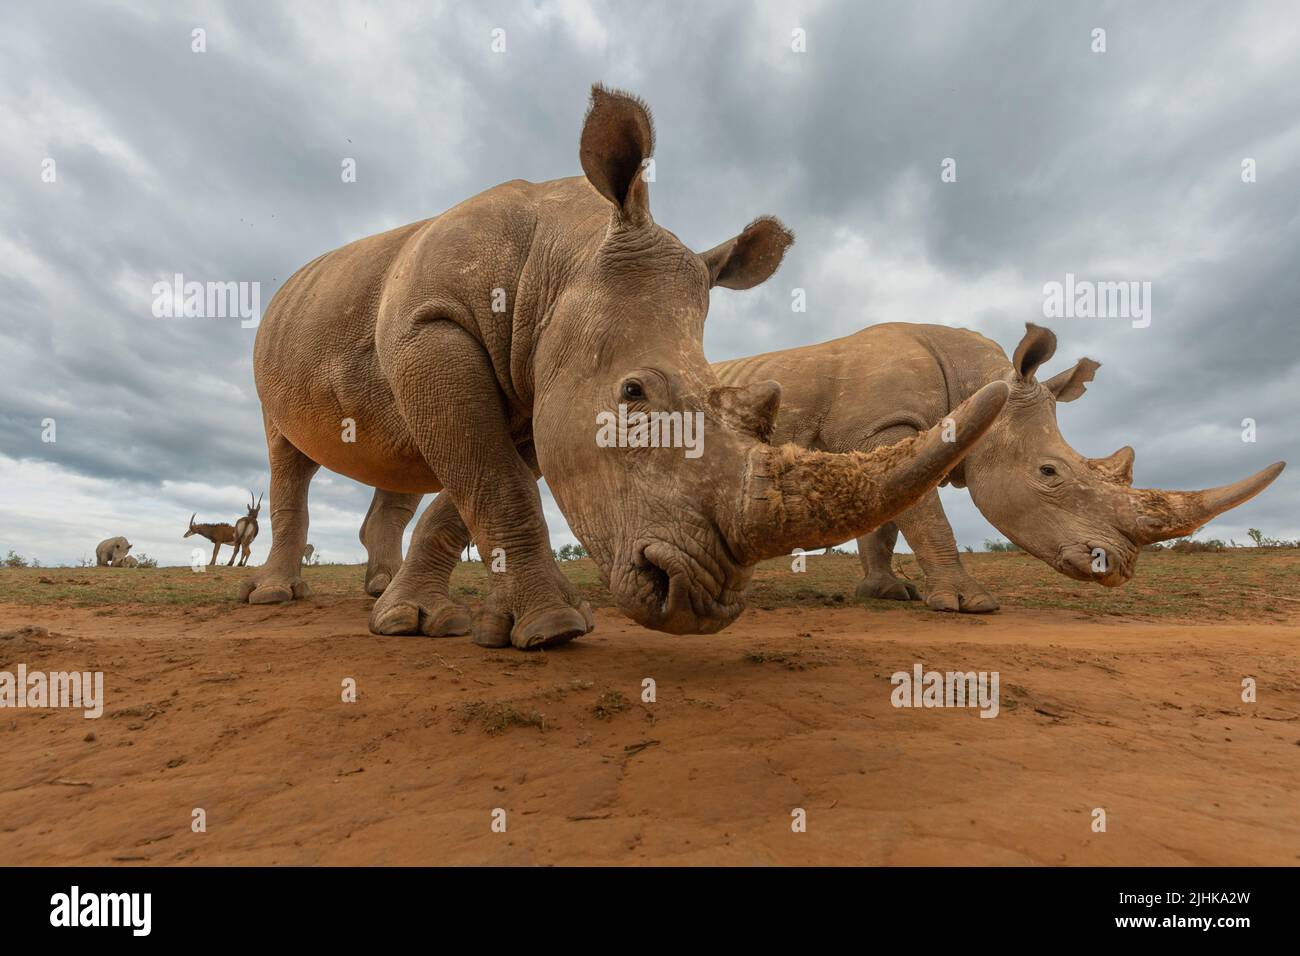 The side profile of the rhinos shows their impressive horns that are the top reason they are poached. EASTERN CAPE, SOUTH AFRICA. Rhino selfies  By Ai Stock Photo